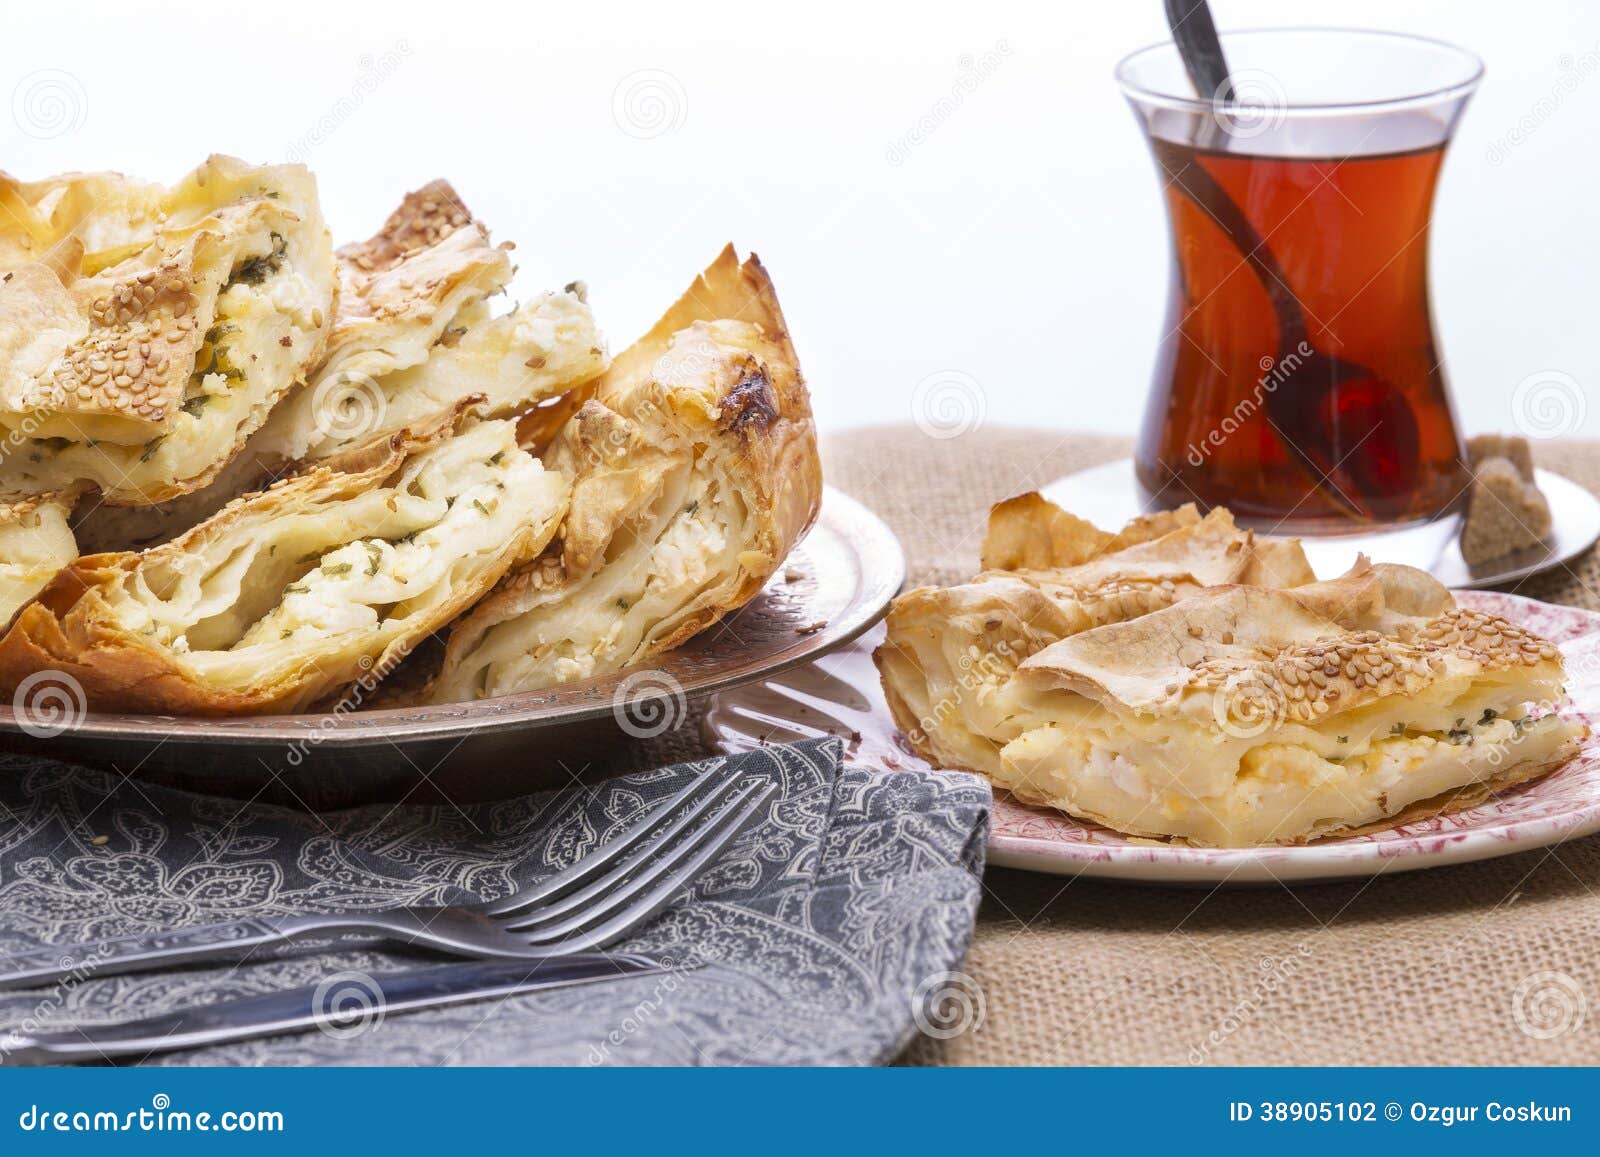 turkish borek served at a party